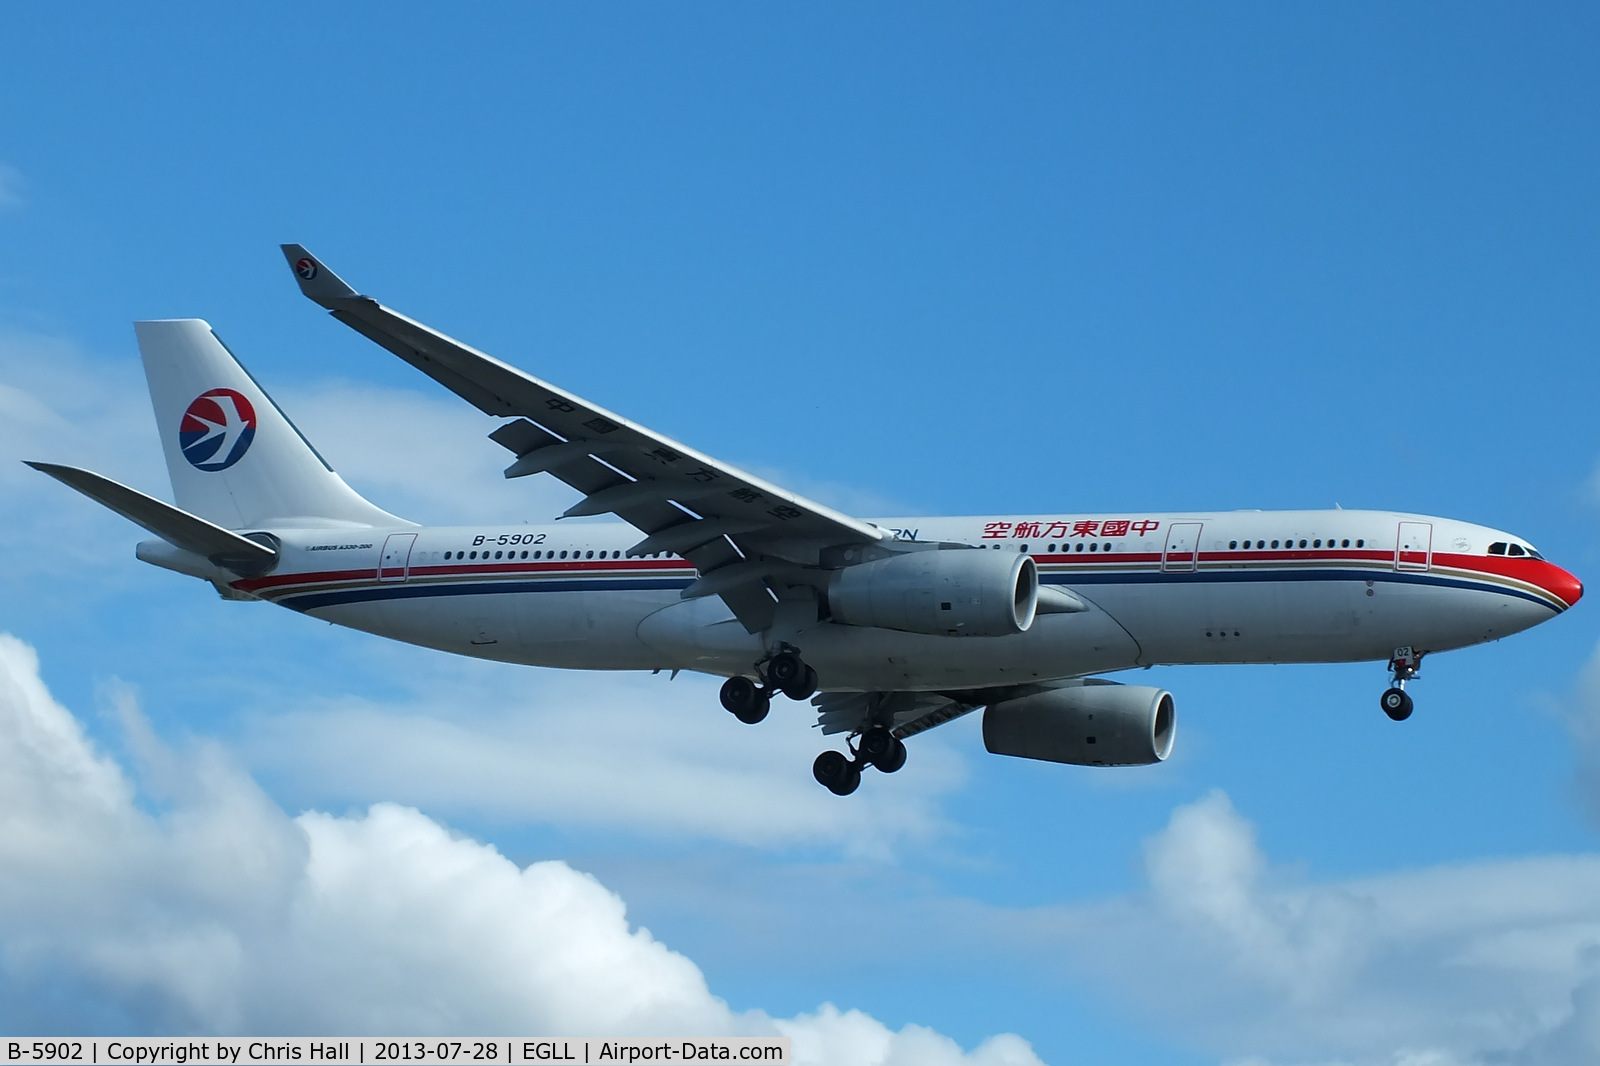 B-5902, 2012 Airbus A330-243 C/N 1324, China Eastern Airlines